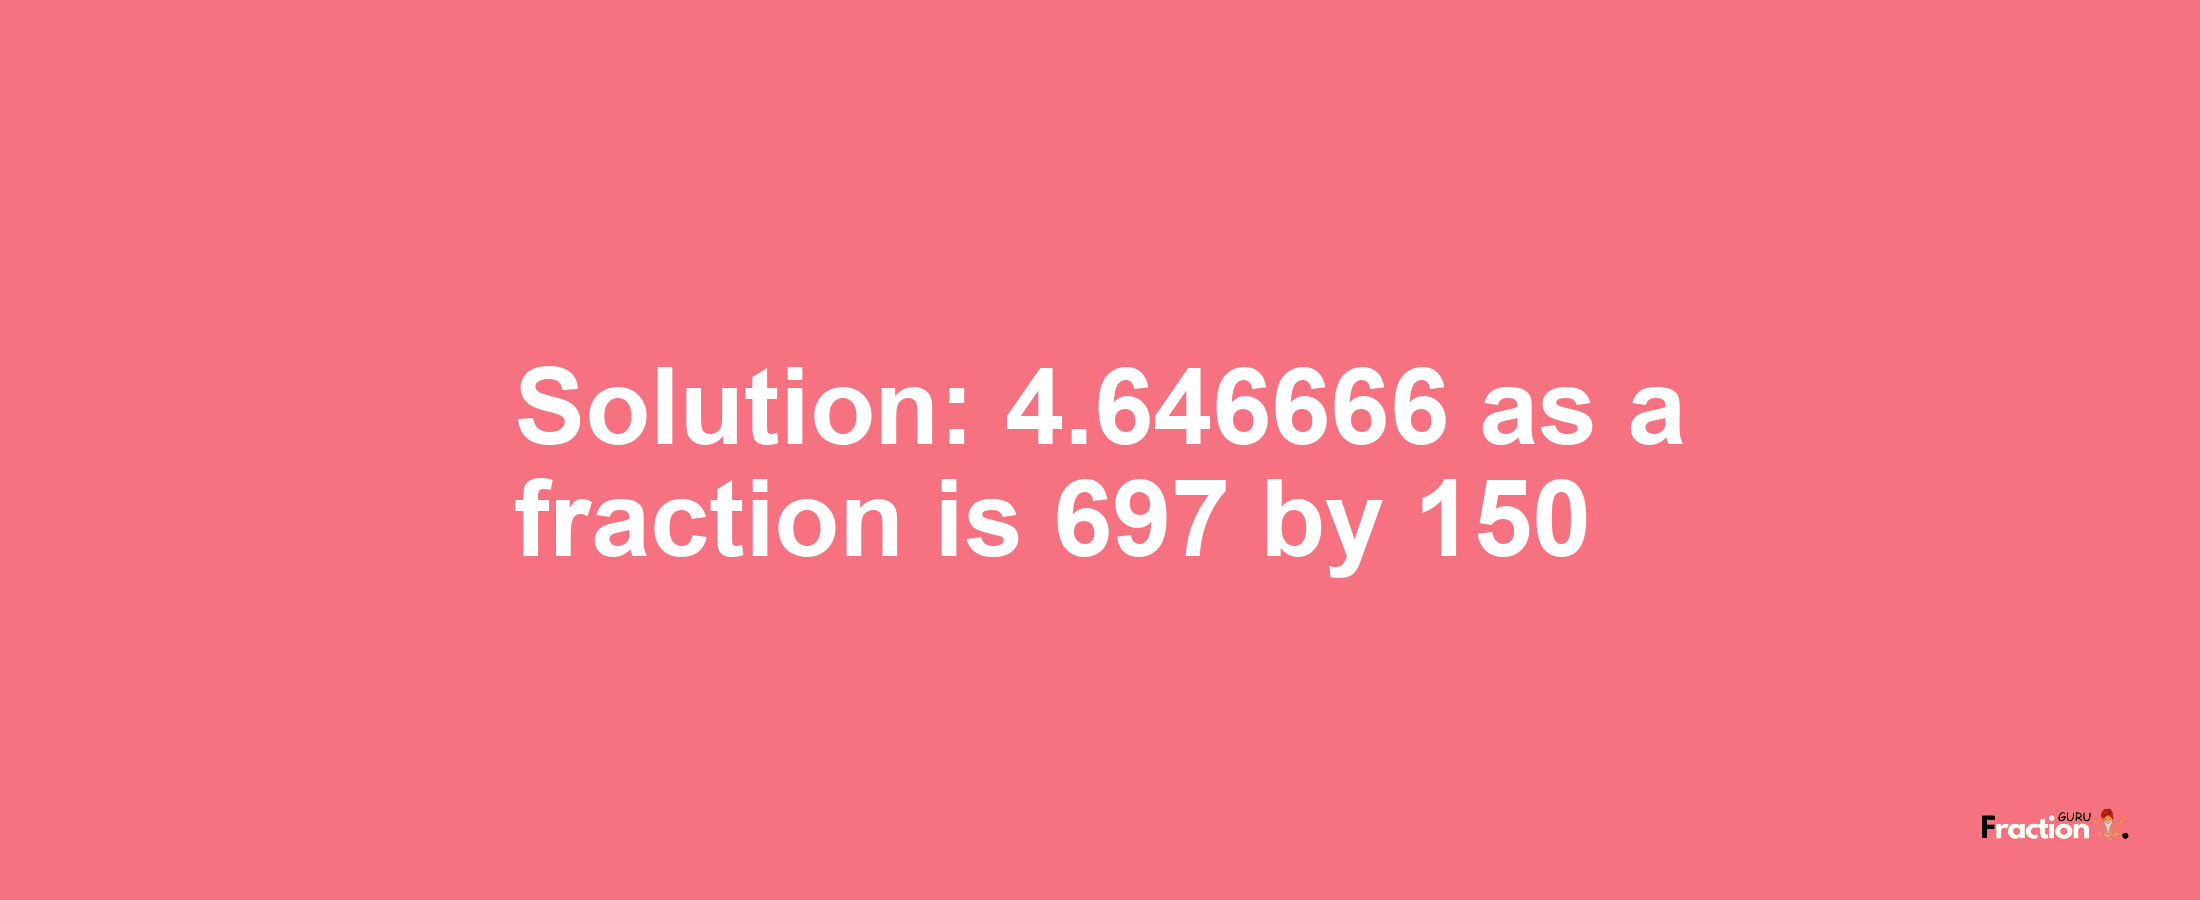 Solution:4.646666 as a fraction is 697/150